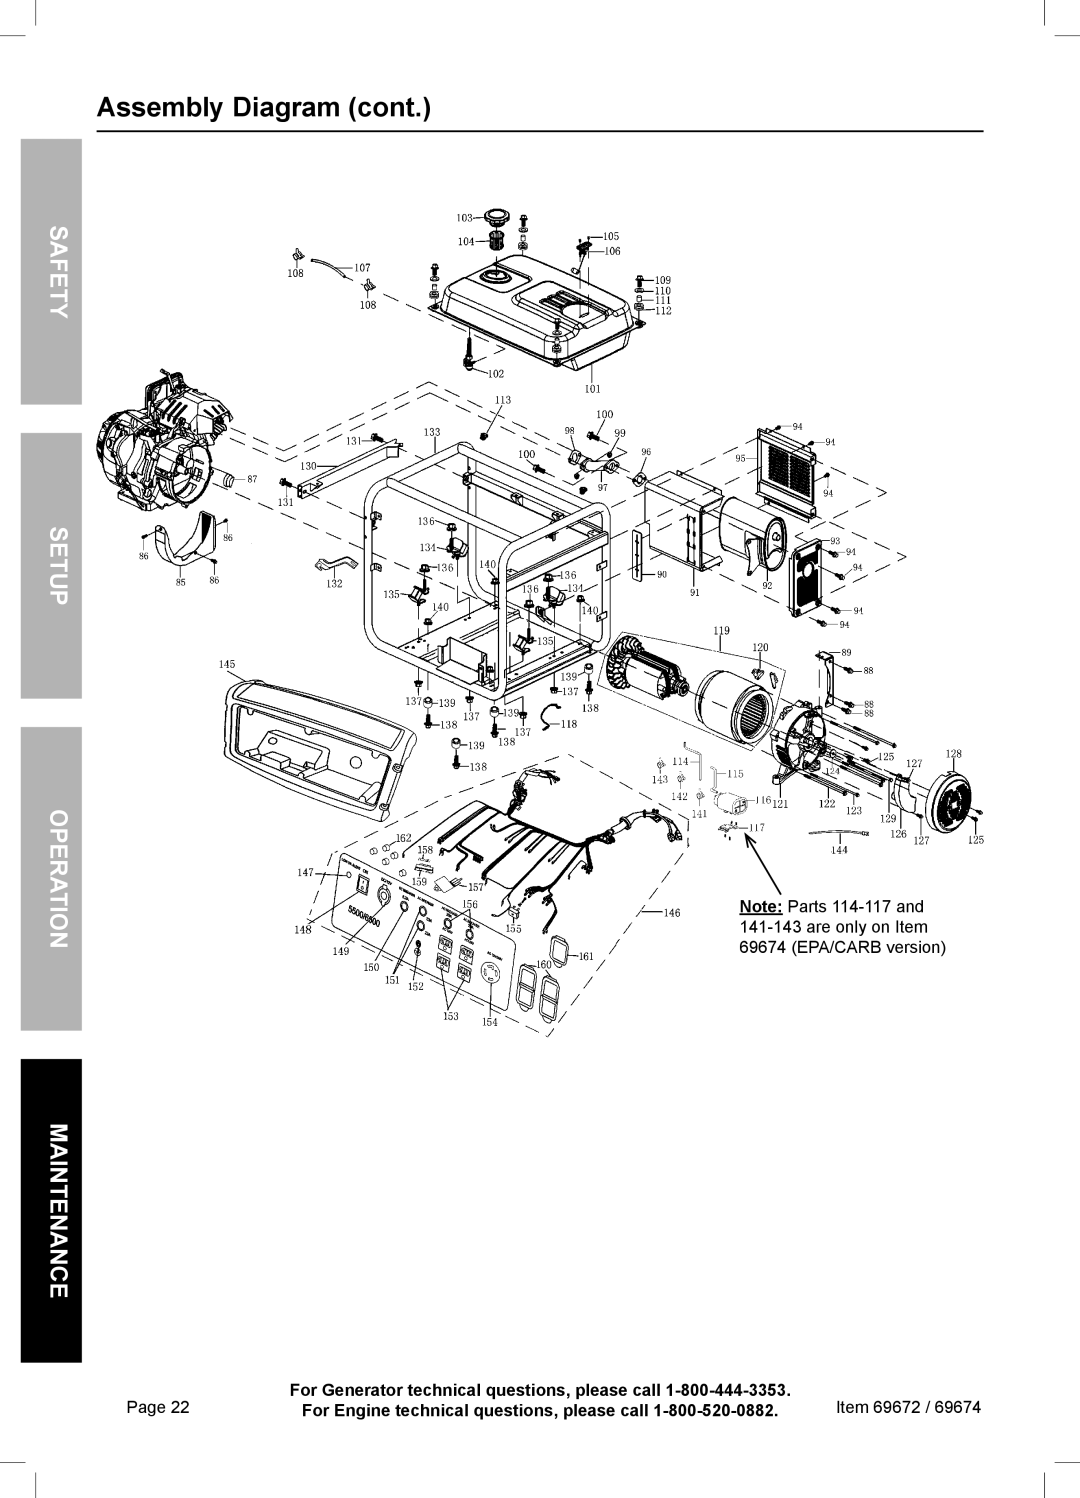 Harbor Freight Tools 69672 manual Assembly Diagram cont, Safety Setup Operation Maintenance, Page 